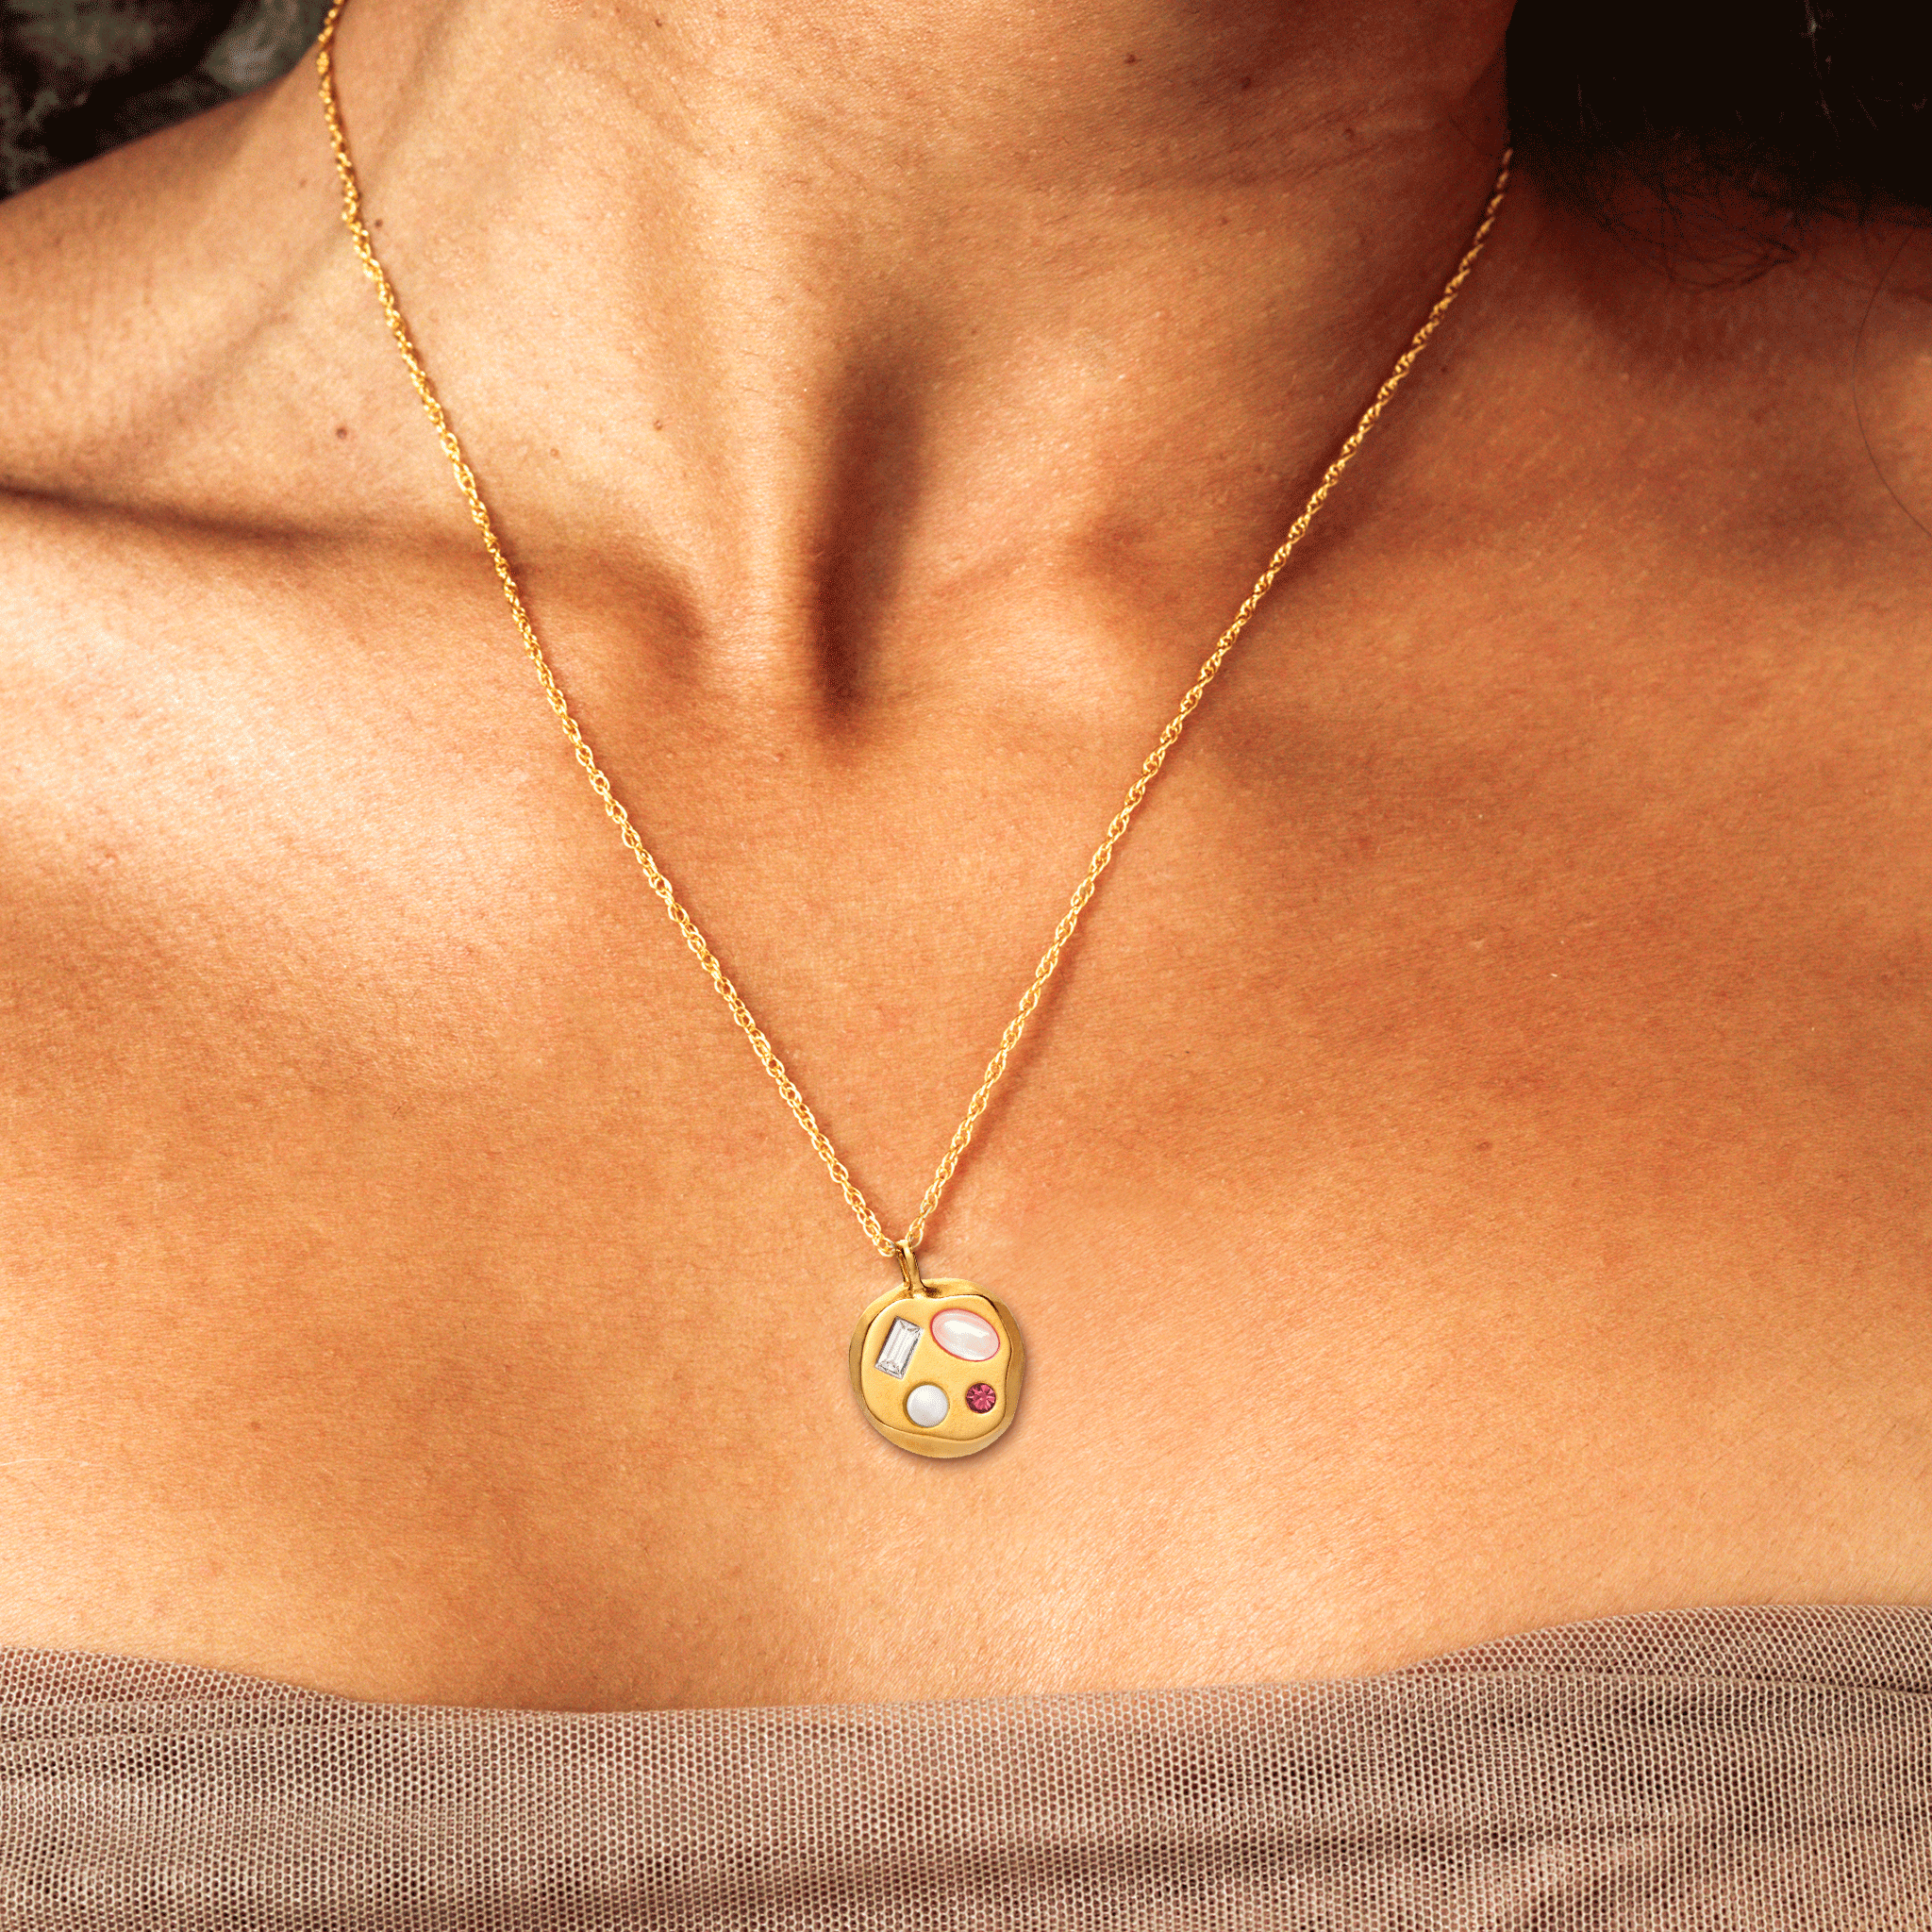 Person wearing The April Nineteenth Pendant